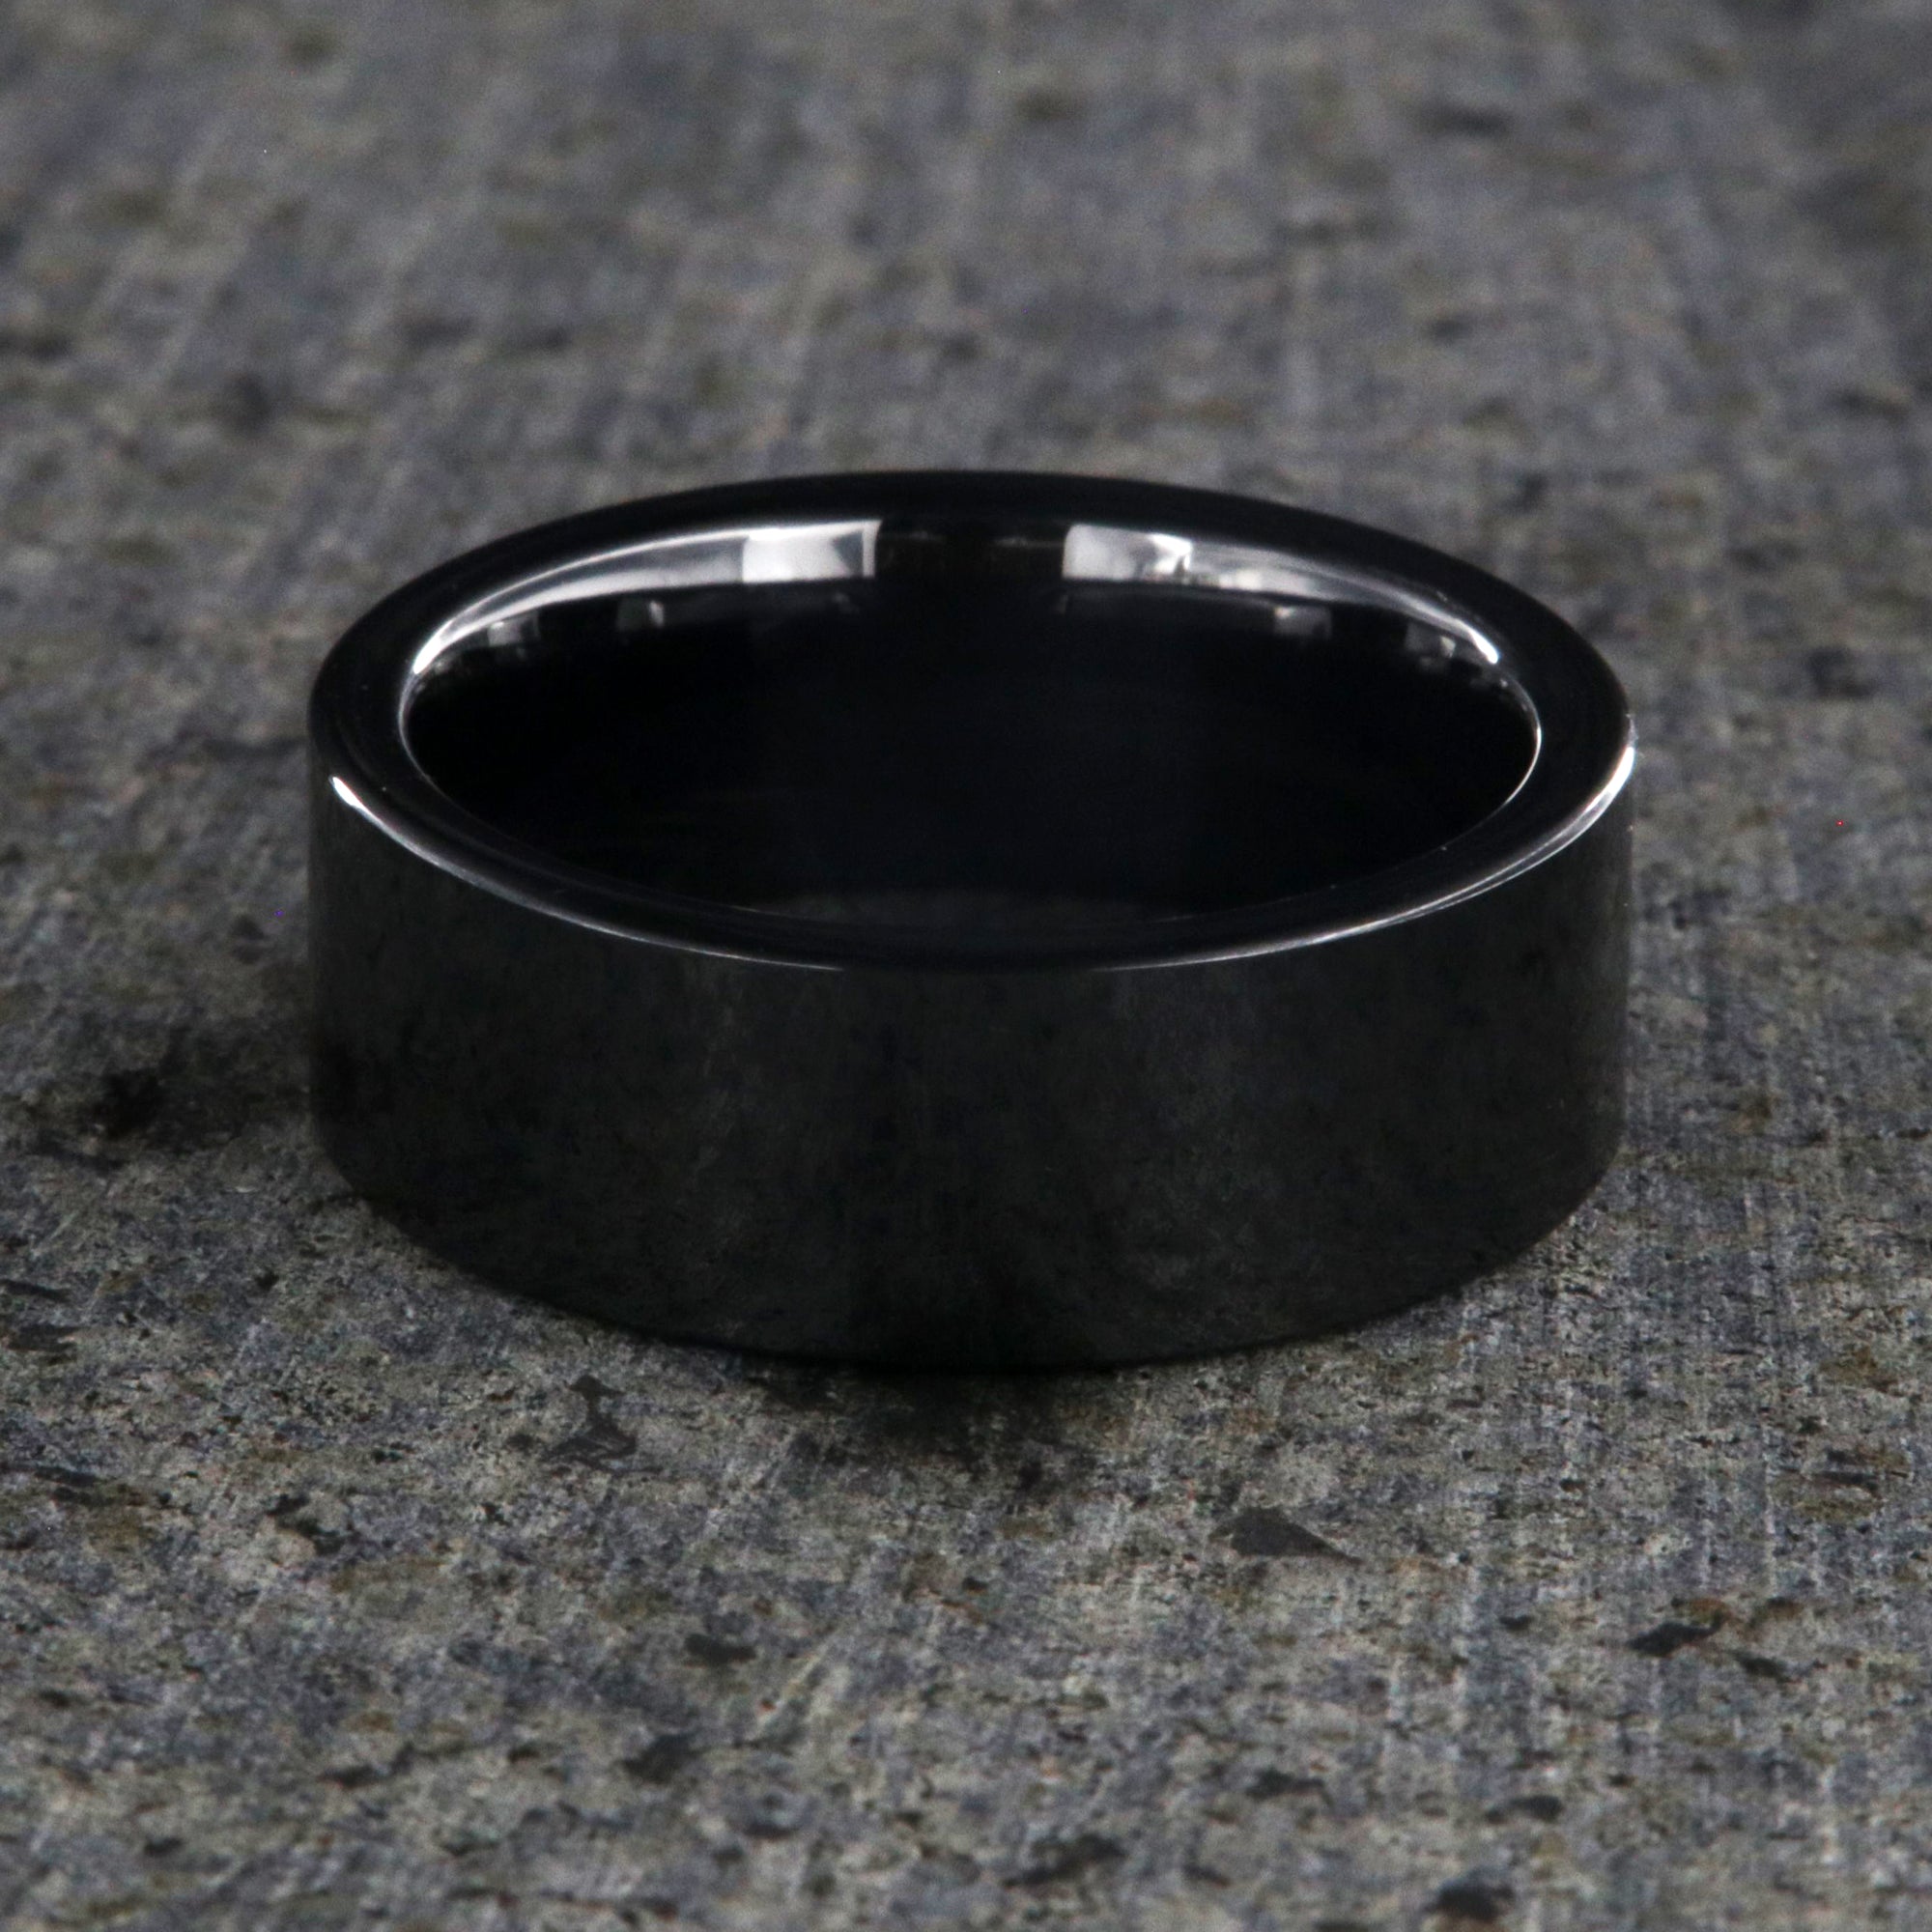 8mm wide black ceramic wedding band with a flat profile and polish finish